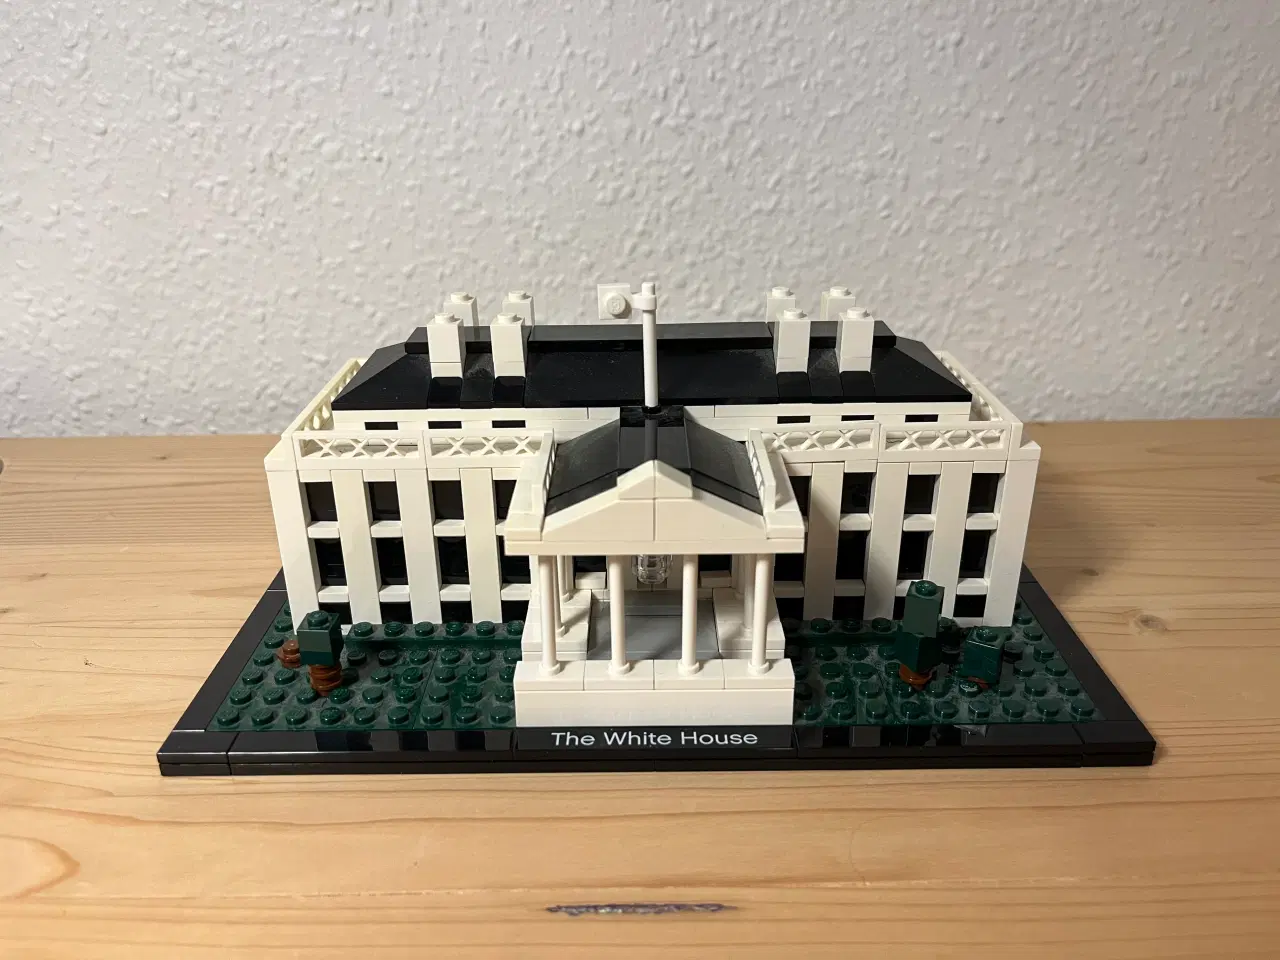 Billede 1 - Lego architecture - The White House // 21006